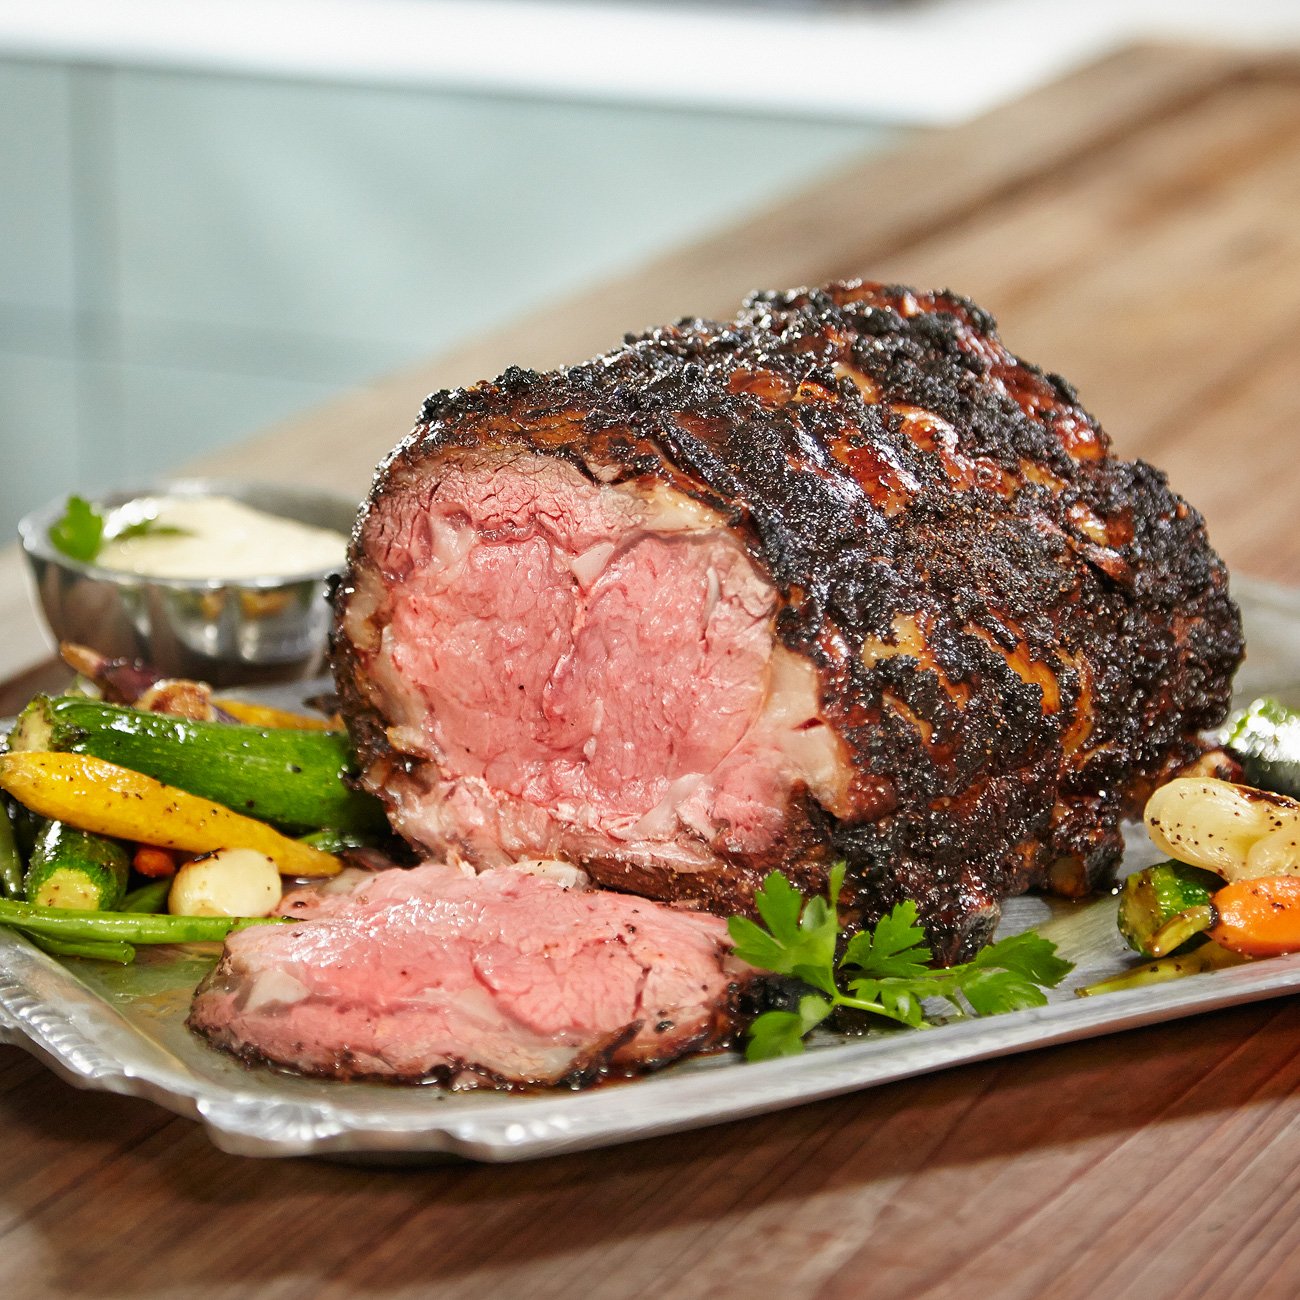 Garlic And Mustard Crusted Prime Rib Roast Recipe From H E B,Ashley Furniture Reviews Indeed